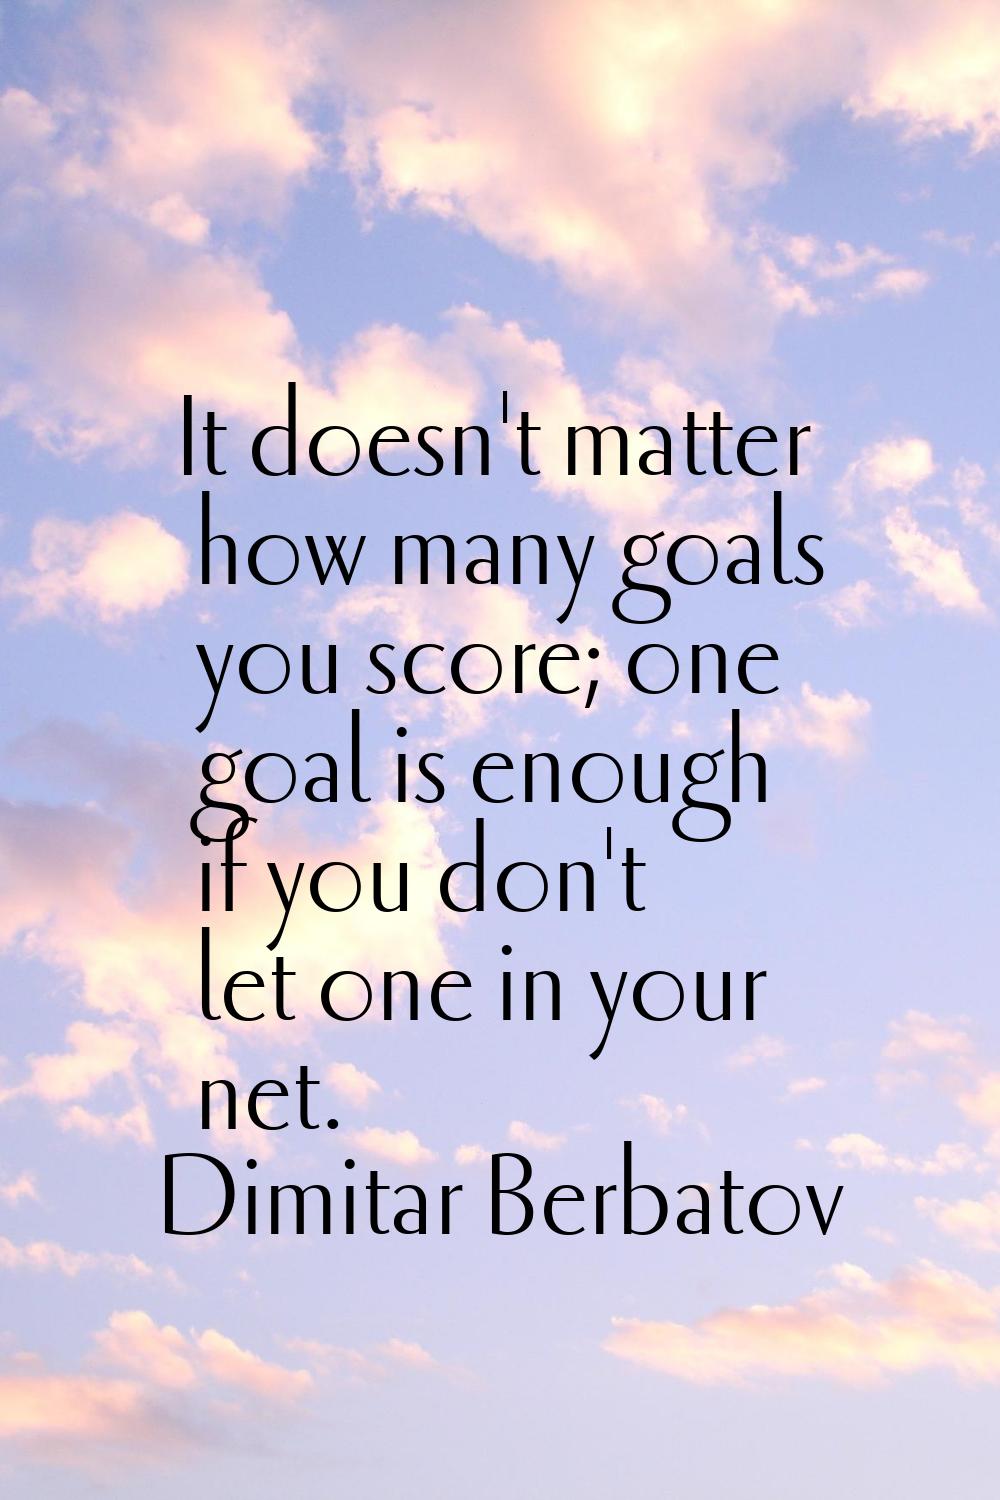 It doesn't matter how many goals you score; one goal is enough if you don't let one in your net.